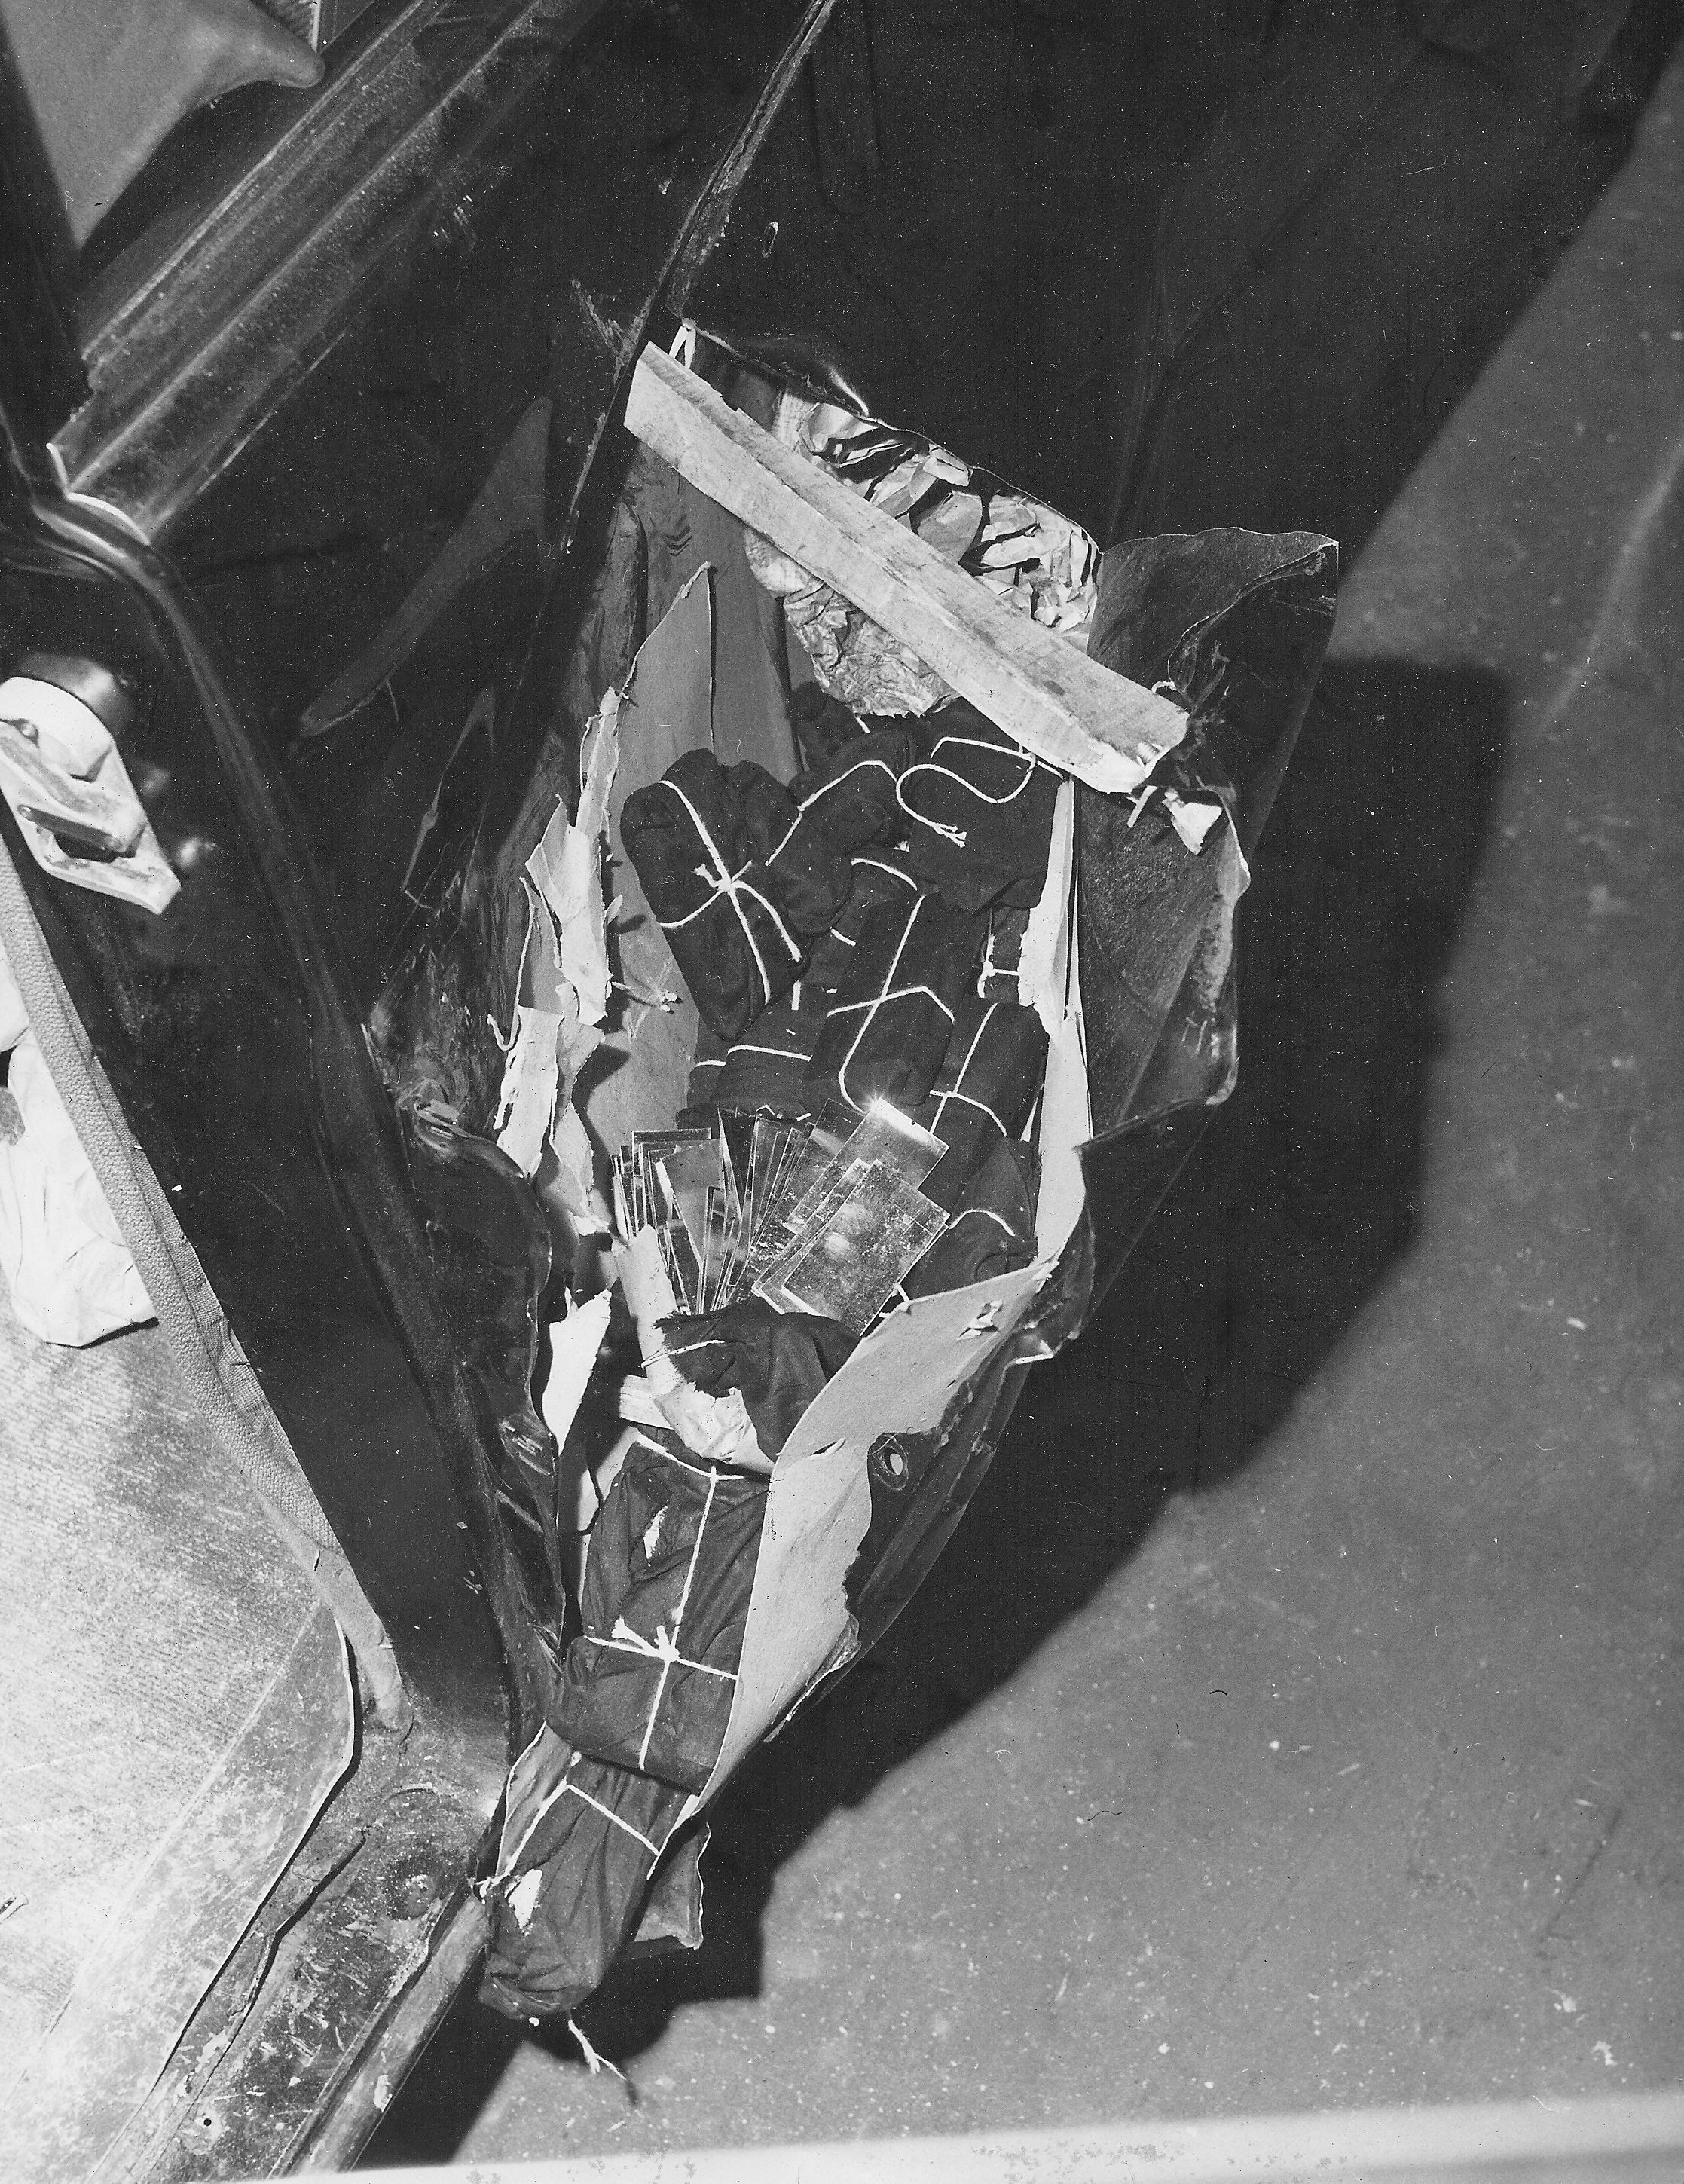 Fender compartment concealing 270 pounds of gold bullion wrapped in small packages. (CBP historical collections, 1951)